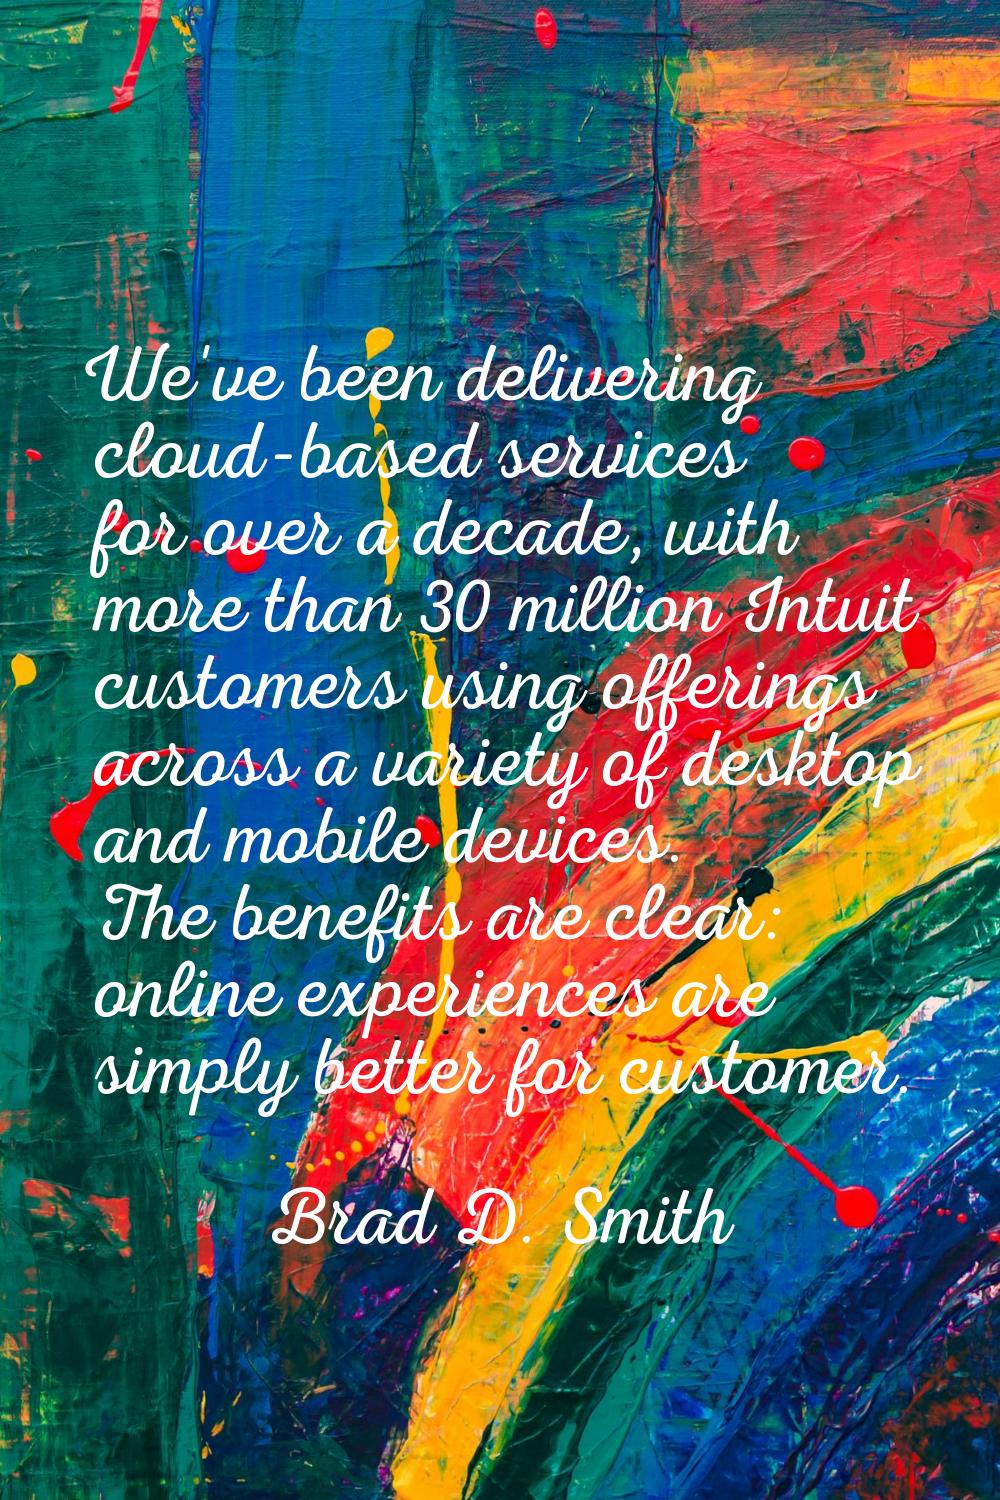 We've been delivering cloud-based services for over a decade, with more than 30 million Intuit cust